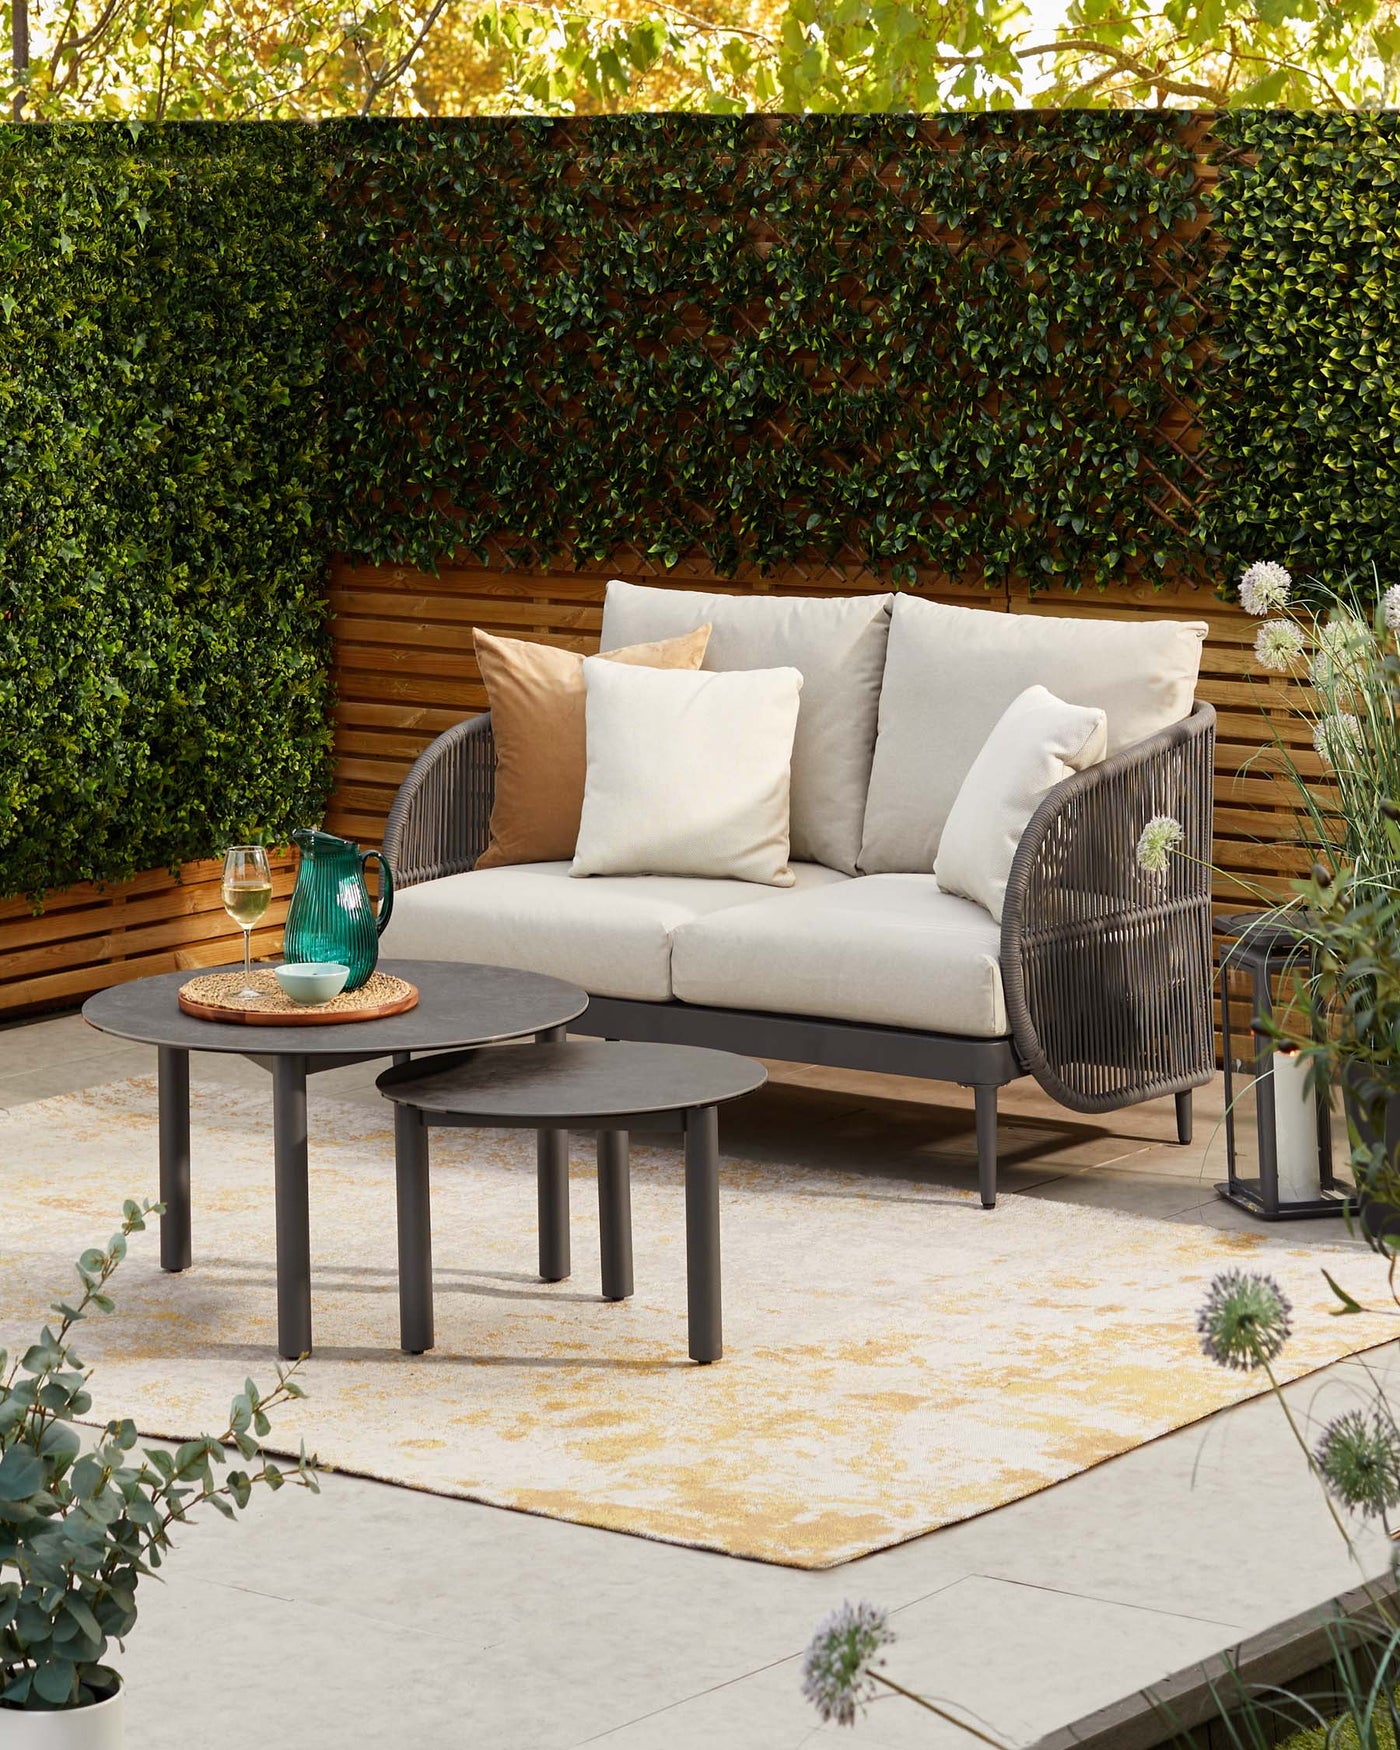 Elegant outdoor patio setup featuring a modern two-seater sofa with beige cushions and wicker side panels, accompanied by two round nesting coffee tables with dark matte finishes, on a textured cream and yellow area rug.